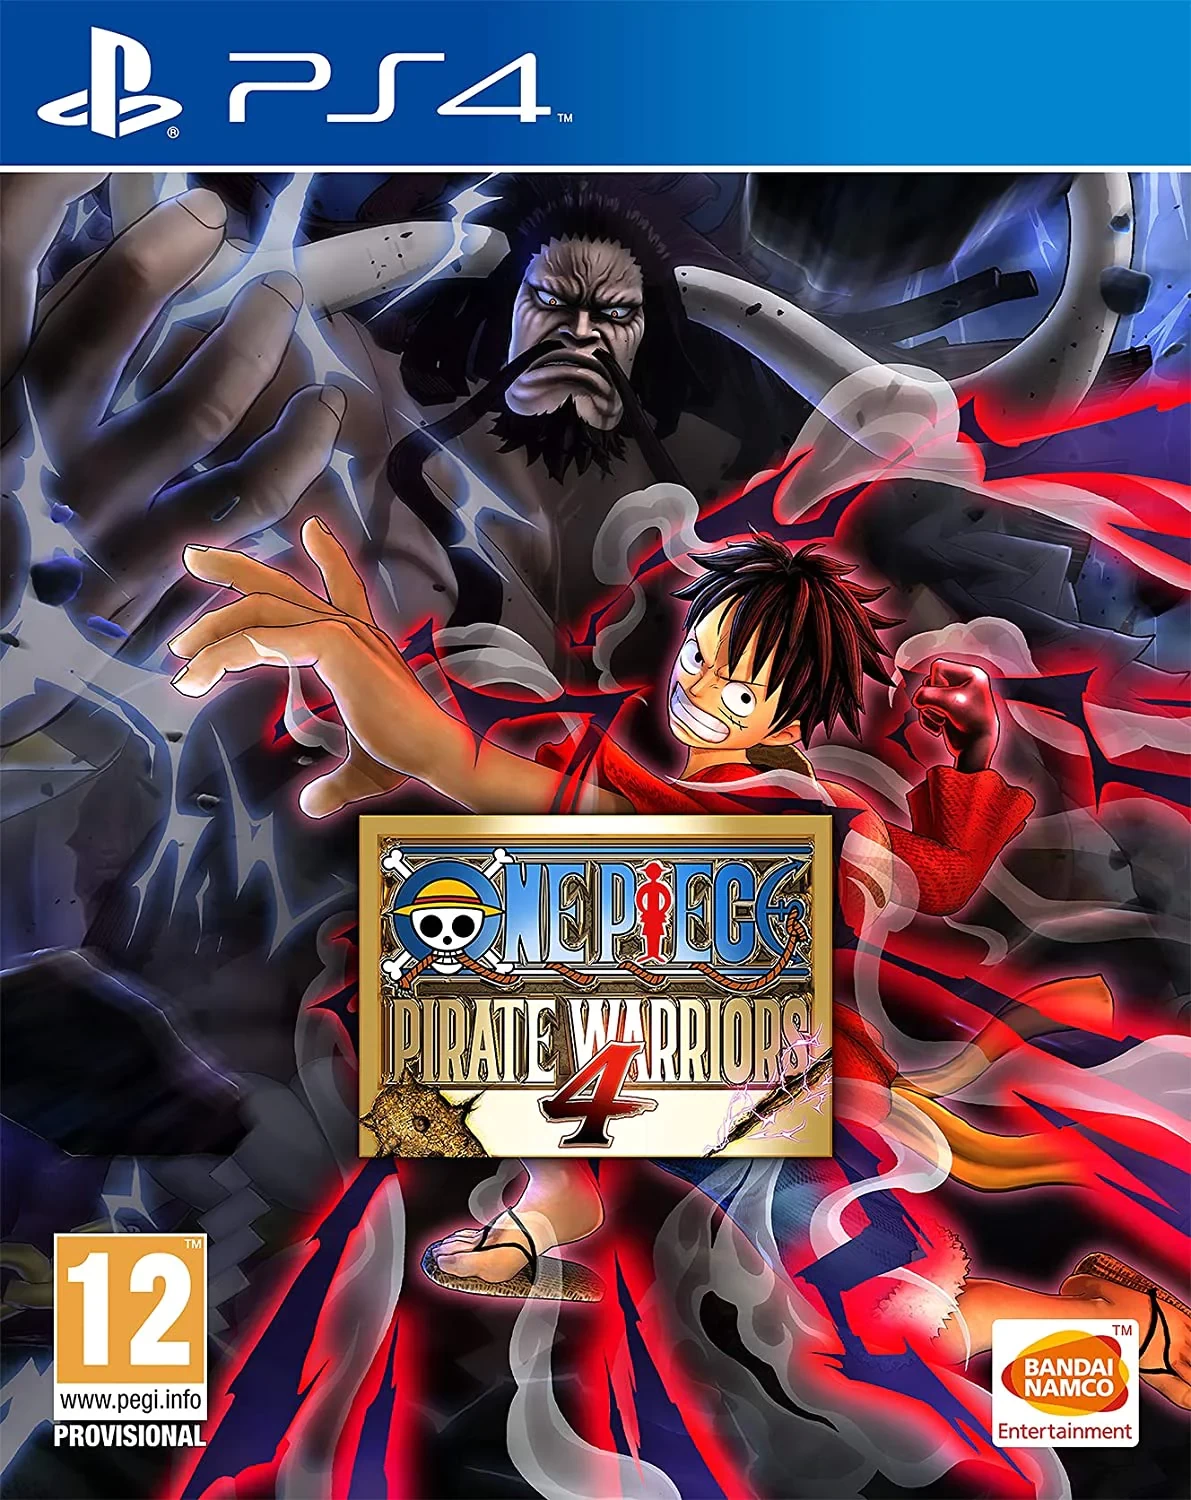 CD PS4 ONE PIECE PIRATE WARRIORS 4